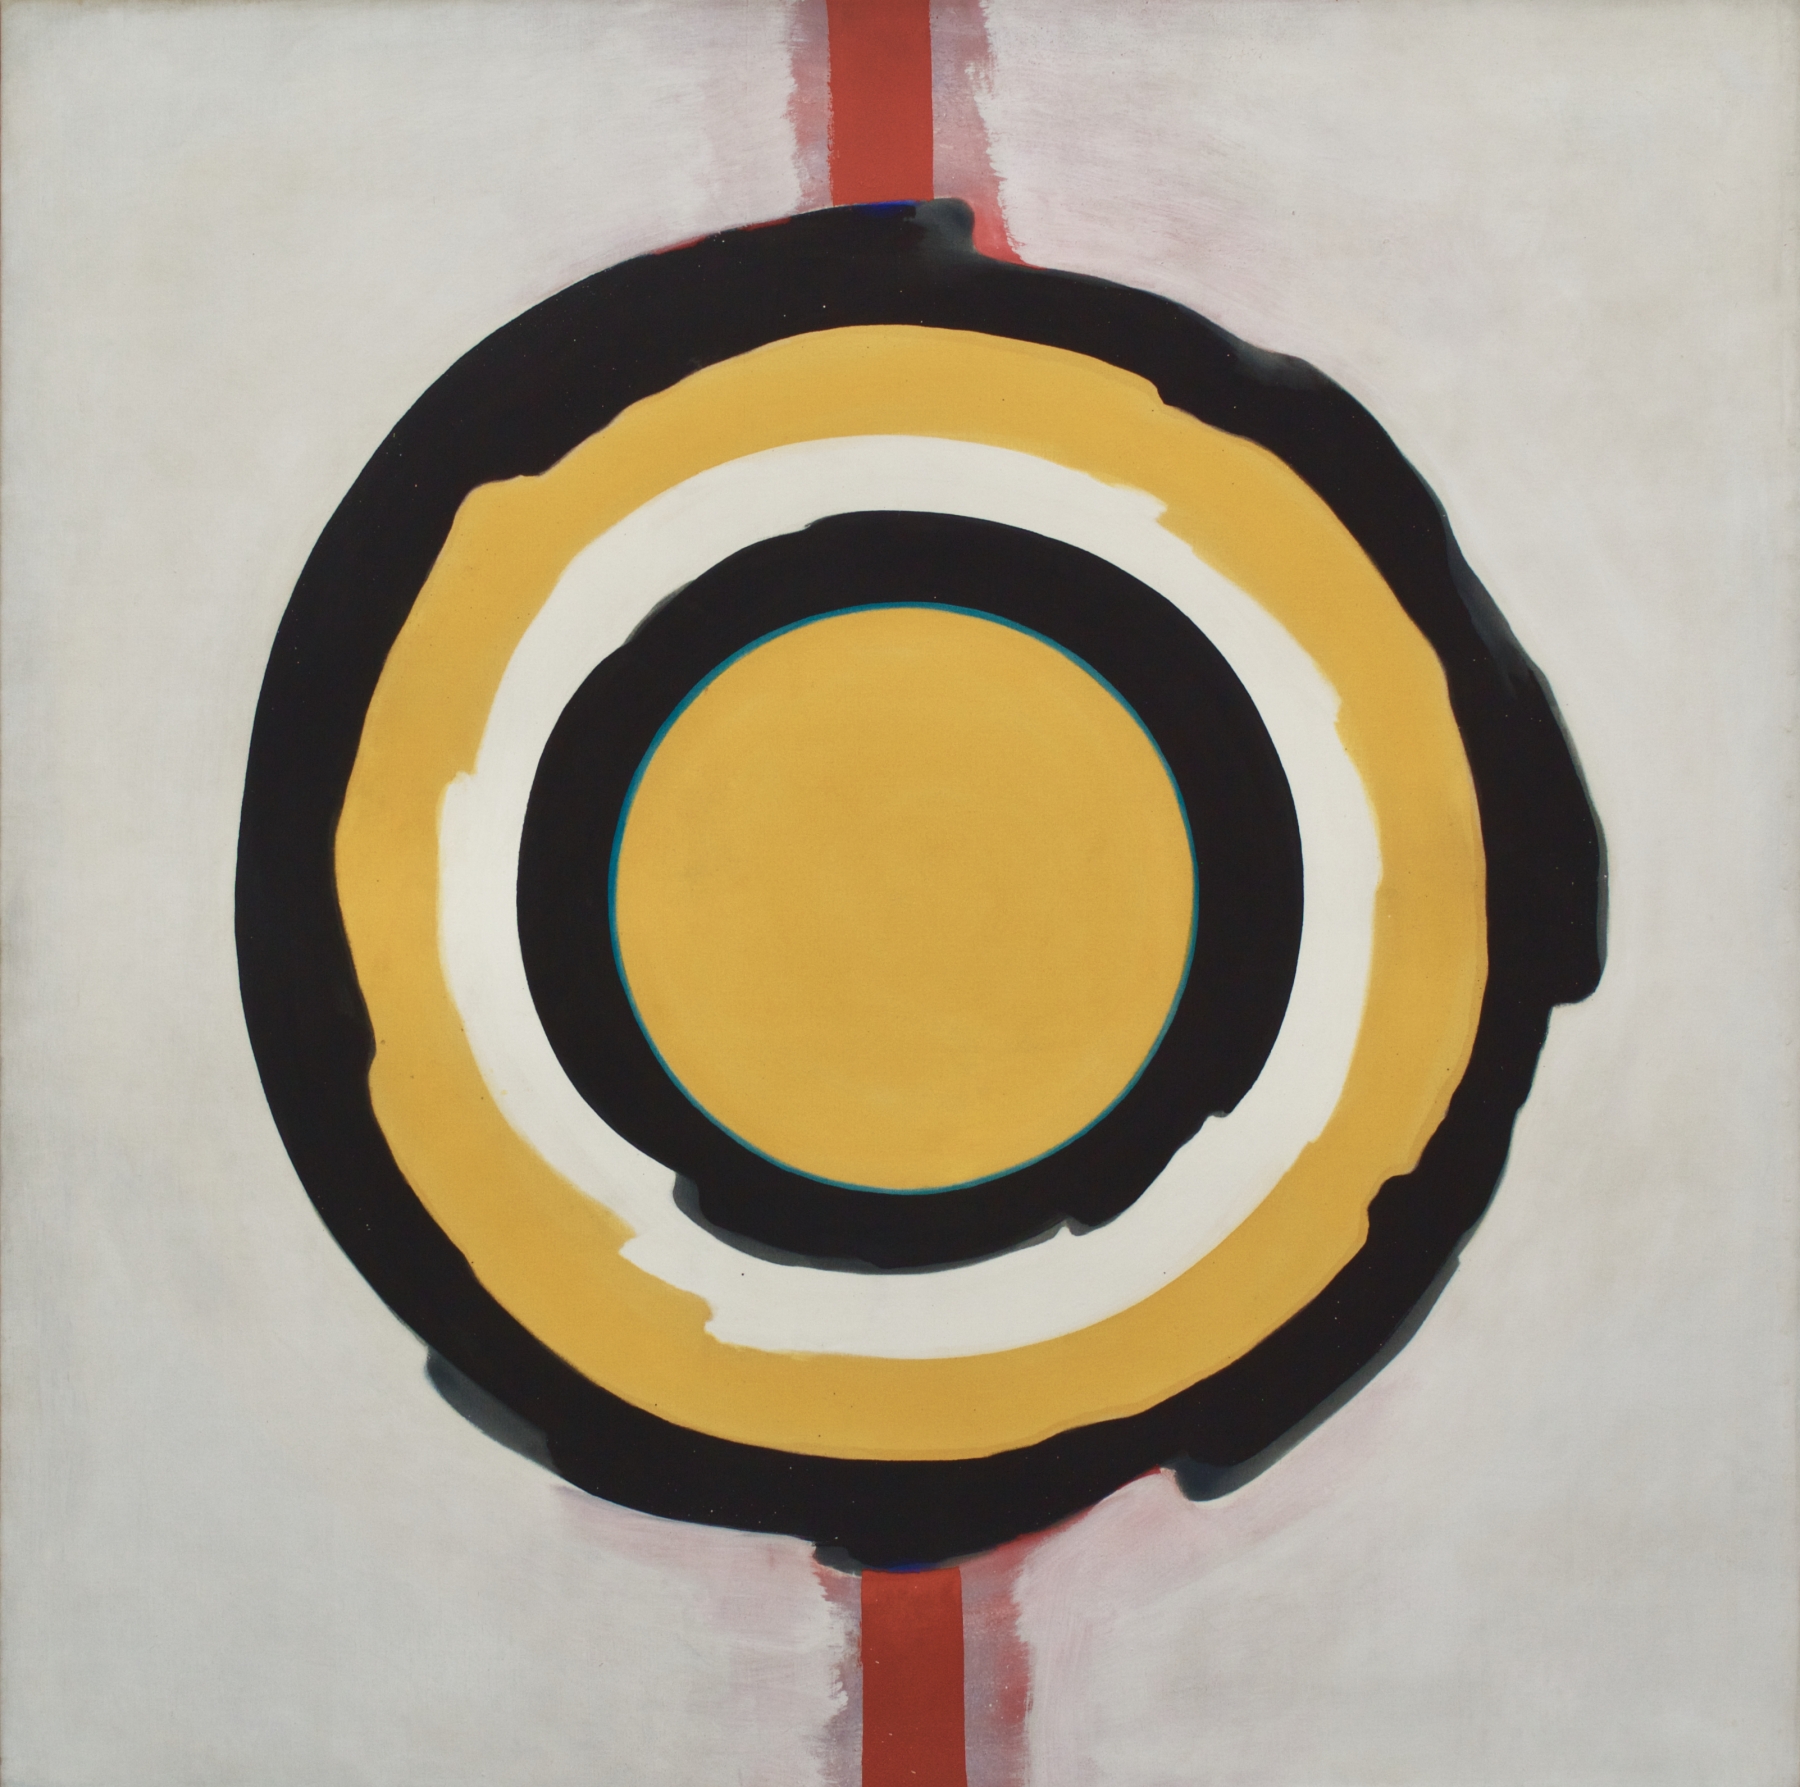 Extent

1959

Magna on canvas

64 x 64 inches

162.6 x 162.6cm